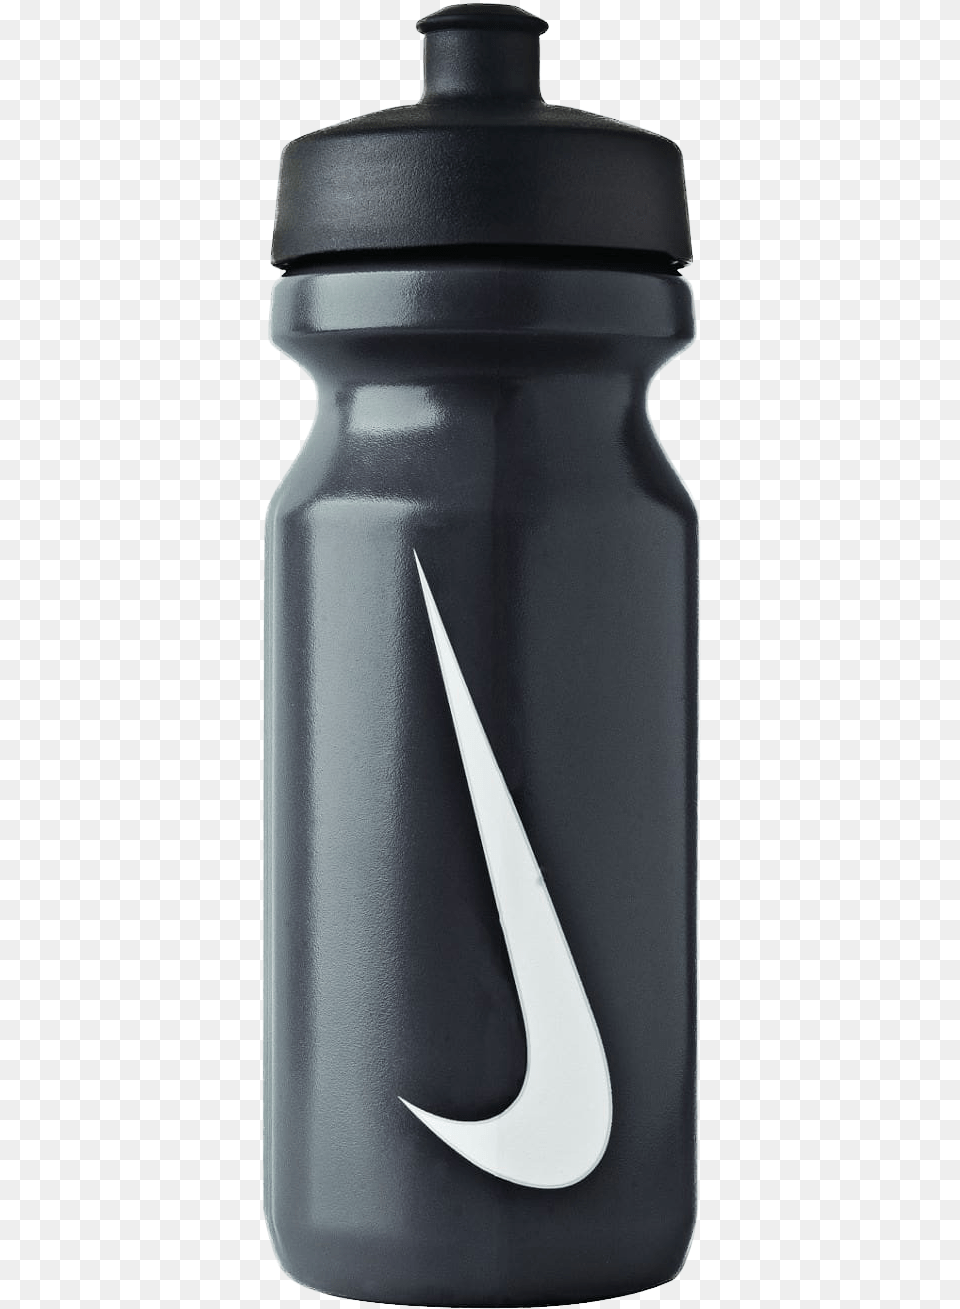 Login Into Your Account Football Water Bottle, Water Bottle, Jar, Blade, Dagger Free Png Download